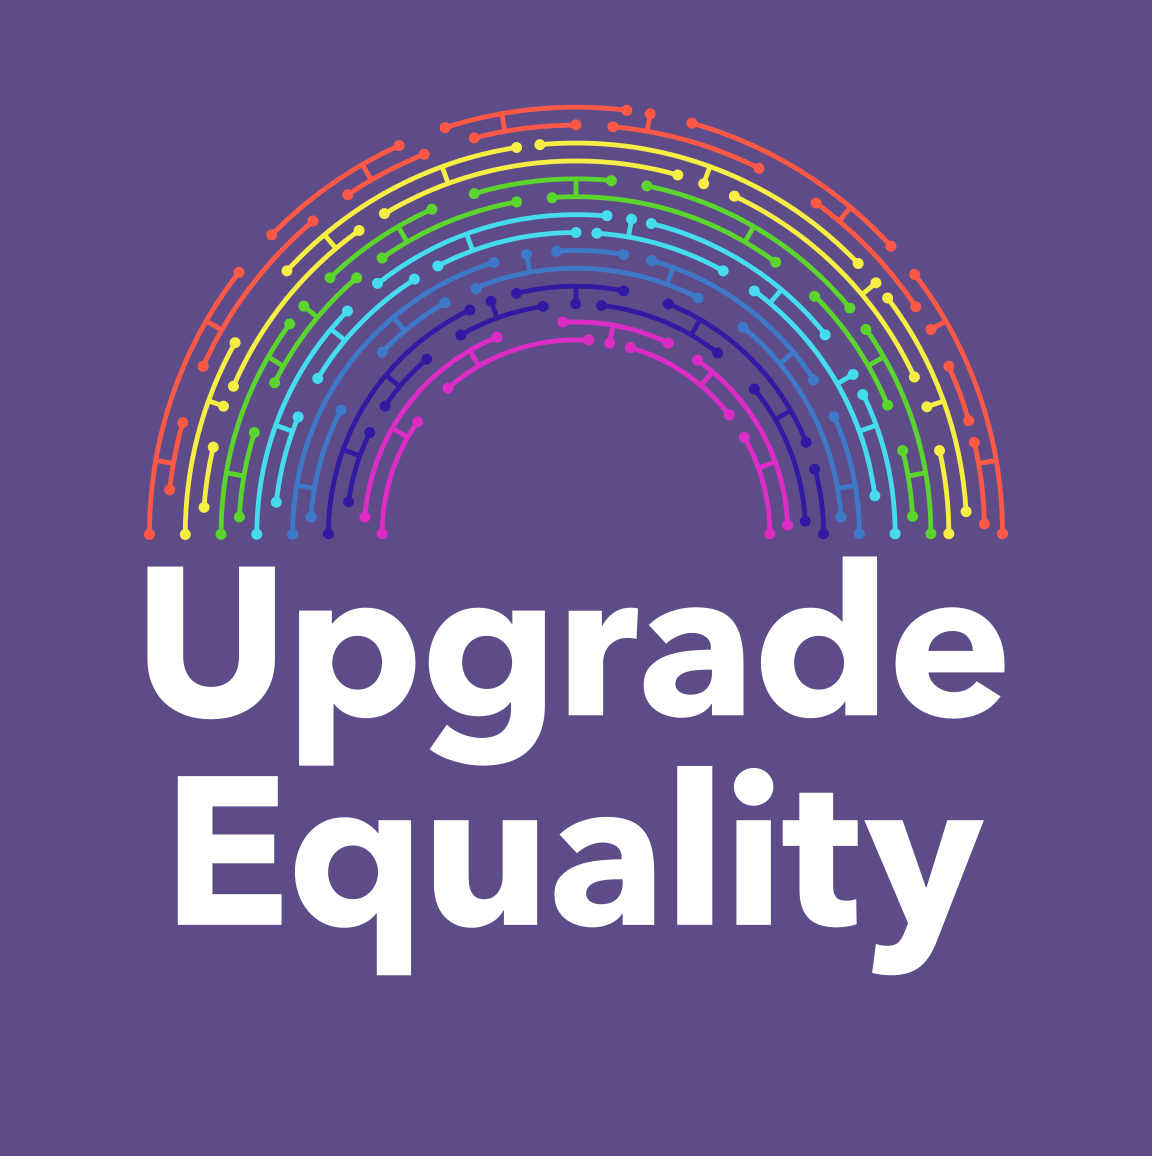 Upgrade Equality with a rainbow made of code on a purple background.